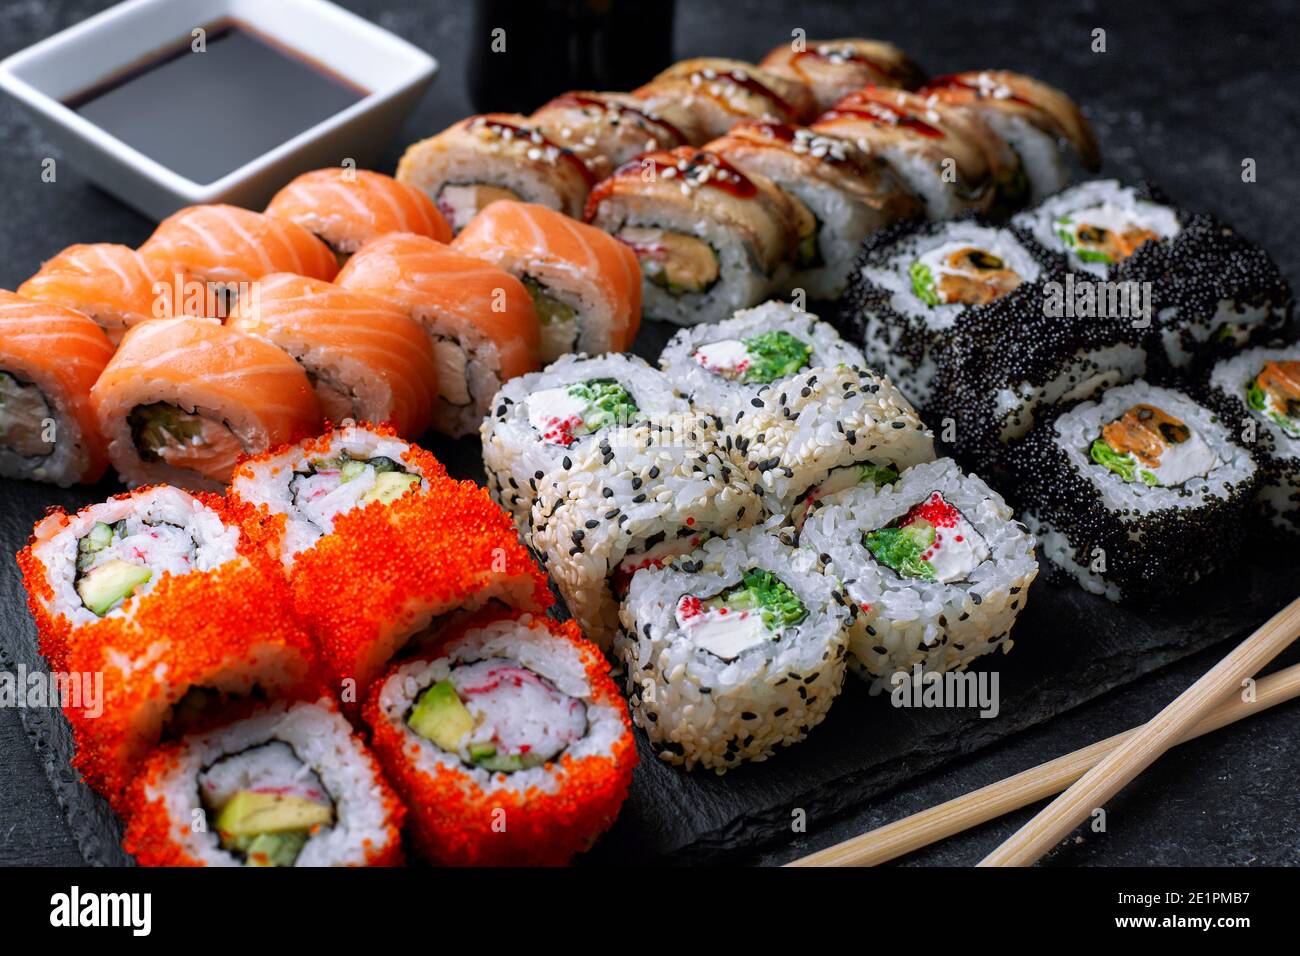 Sushi set, on a black background, five types of rolls Stock Photo